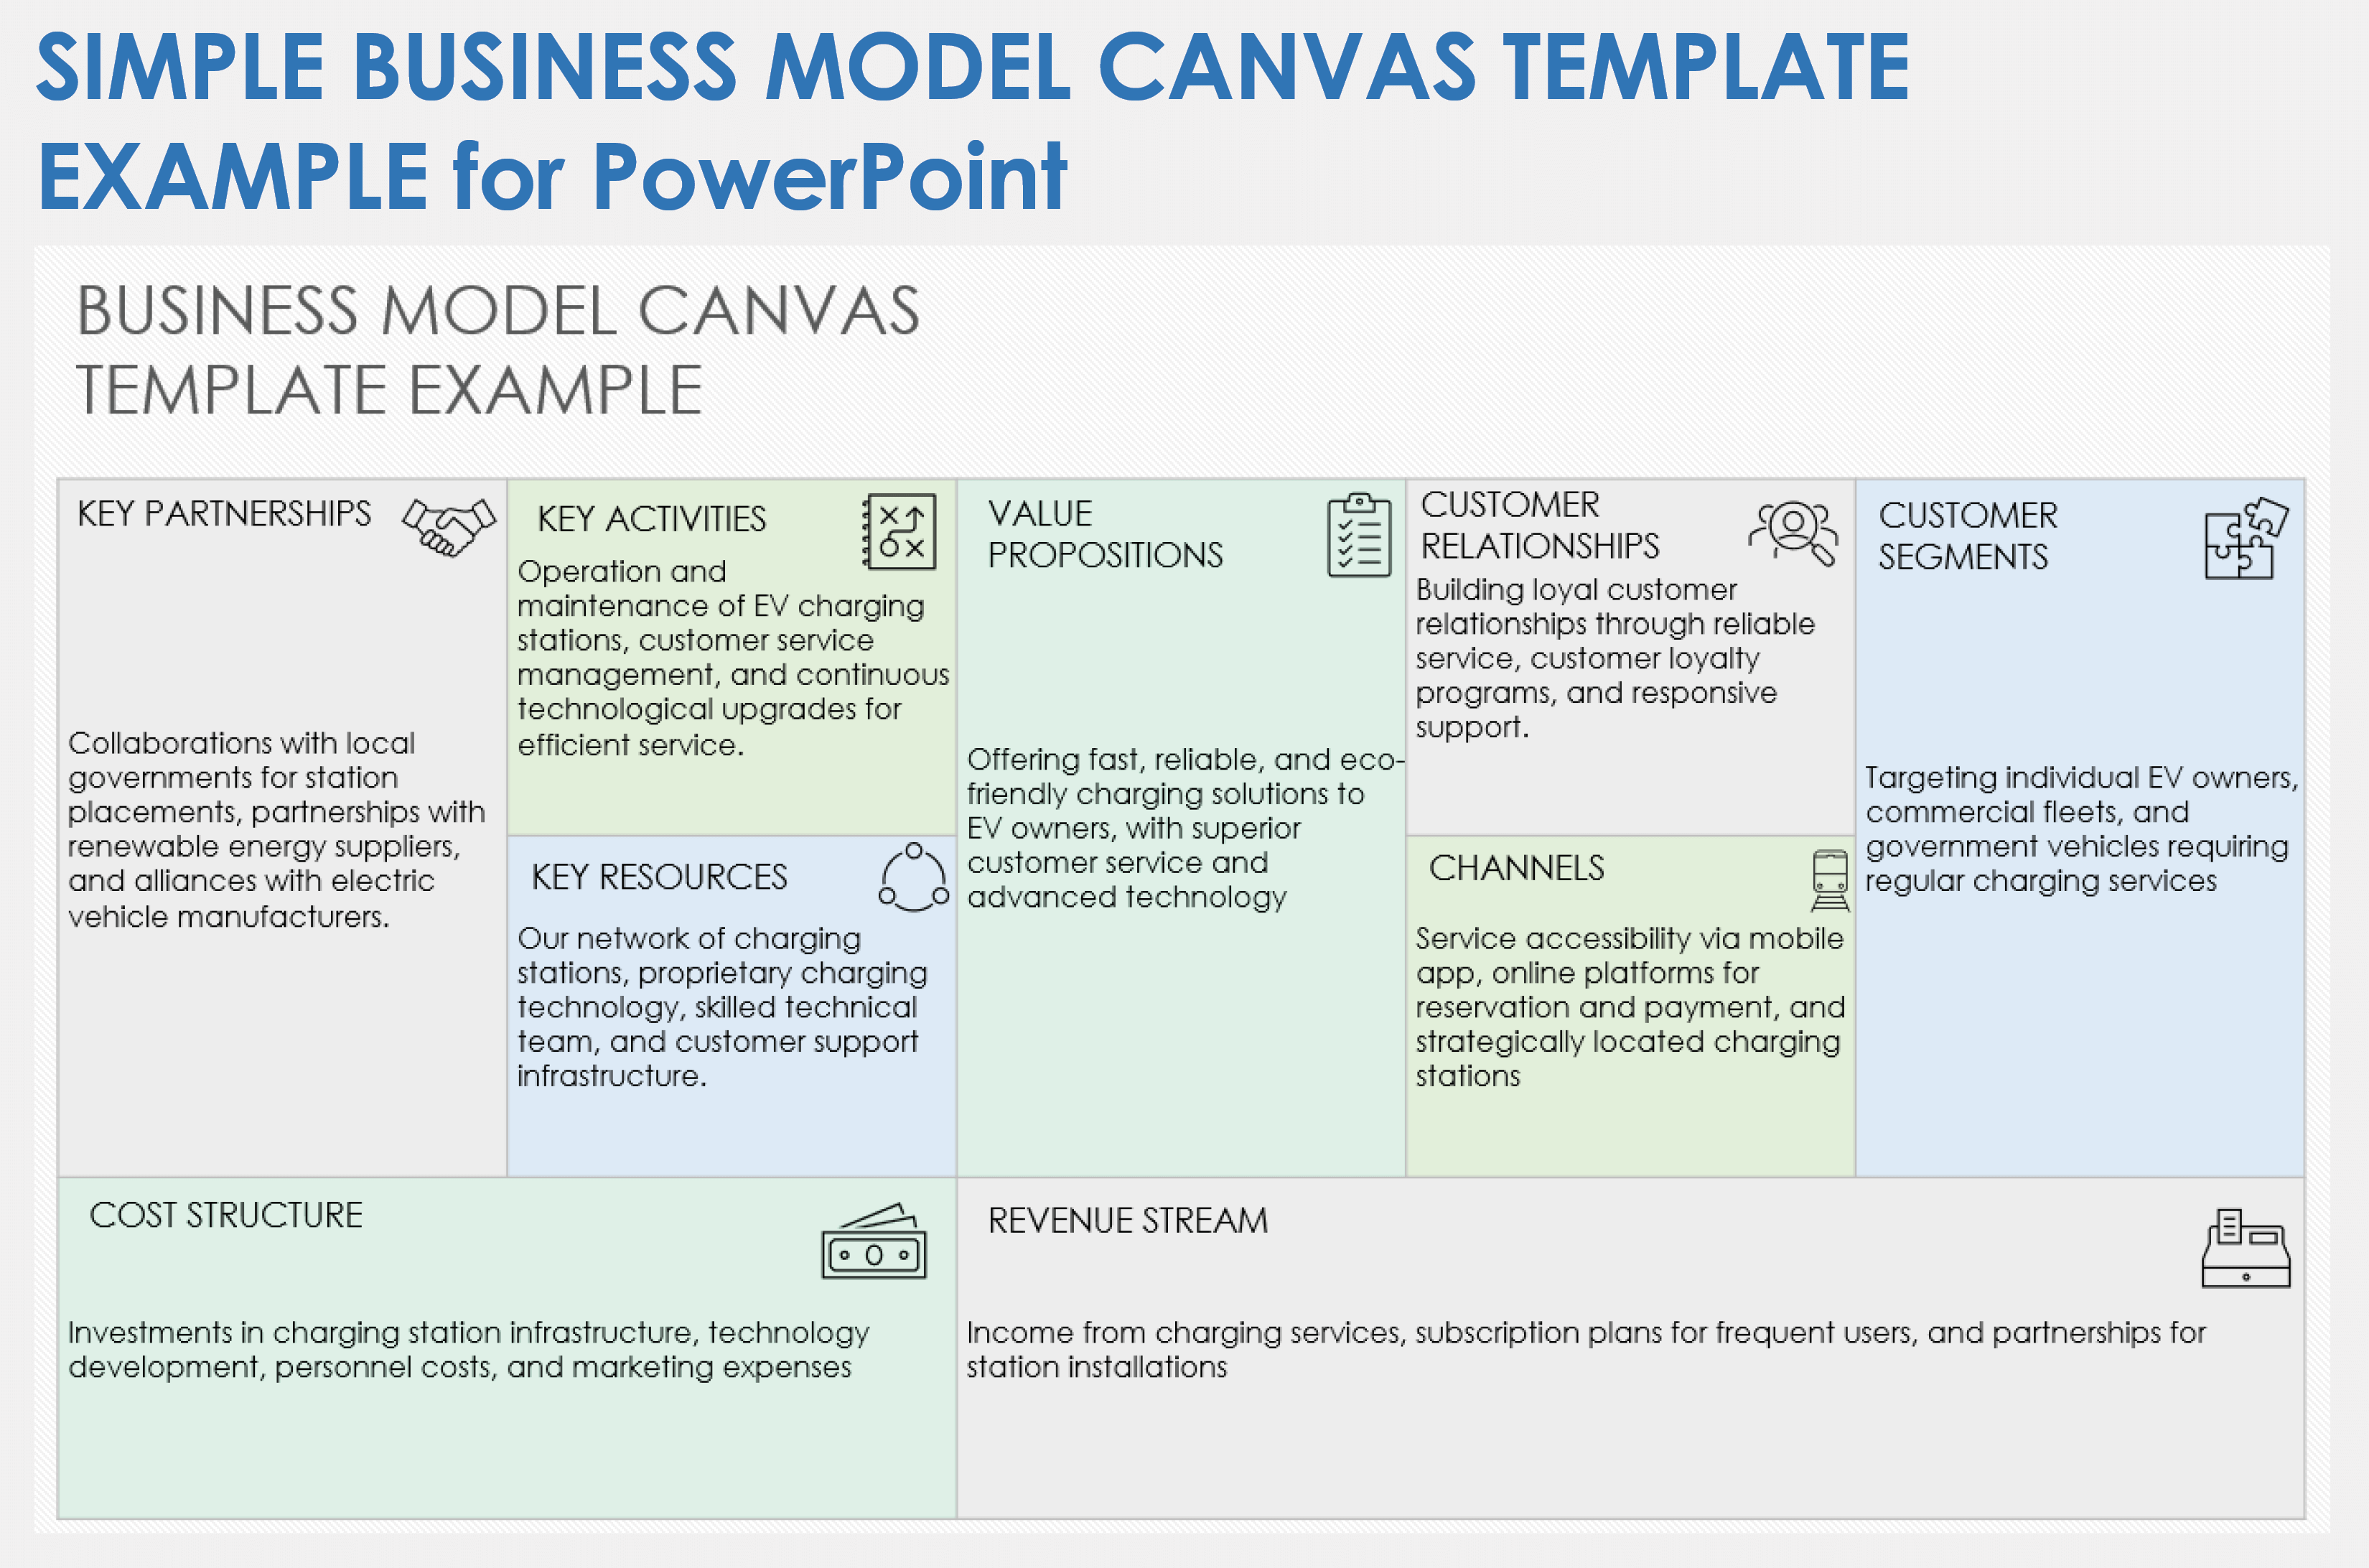 Simple Business Model Canvas Template for Powerpoint